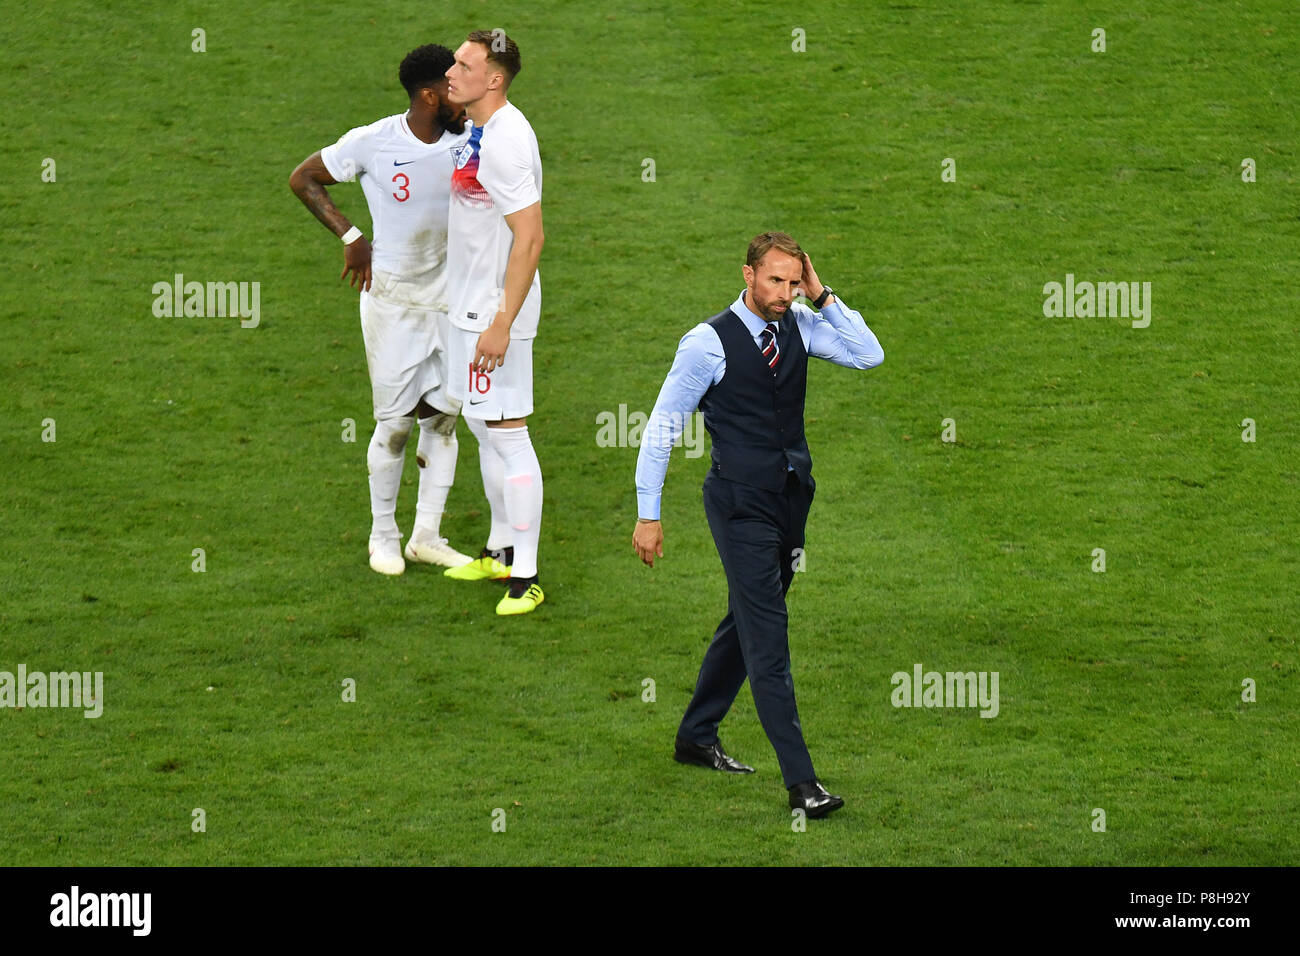 Moscow, Russia. 11th July, 2018.  Gareth SOUTHGATE (coach, ENG) after game end, hi: Danny ROSE (ENG), Phil JONES (ENG) disappointment, frustrated, disappointed, frustrated, dejected, action. Croatia (CRO) - England (ENG) 2-1 nV Semifinals, Round of Four, Match 62 on 07/11/2018 in Moscow, Luzhniki Stadium, Football World Cup 2018 in Russia from 14.06. - 15.07.2018. | usage worldwide Credit: dpa/Alamy Live News Credit: dpa picture alliance/Alamy Live News Stock Photo